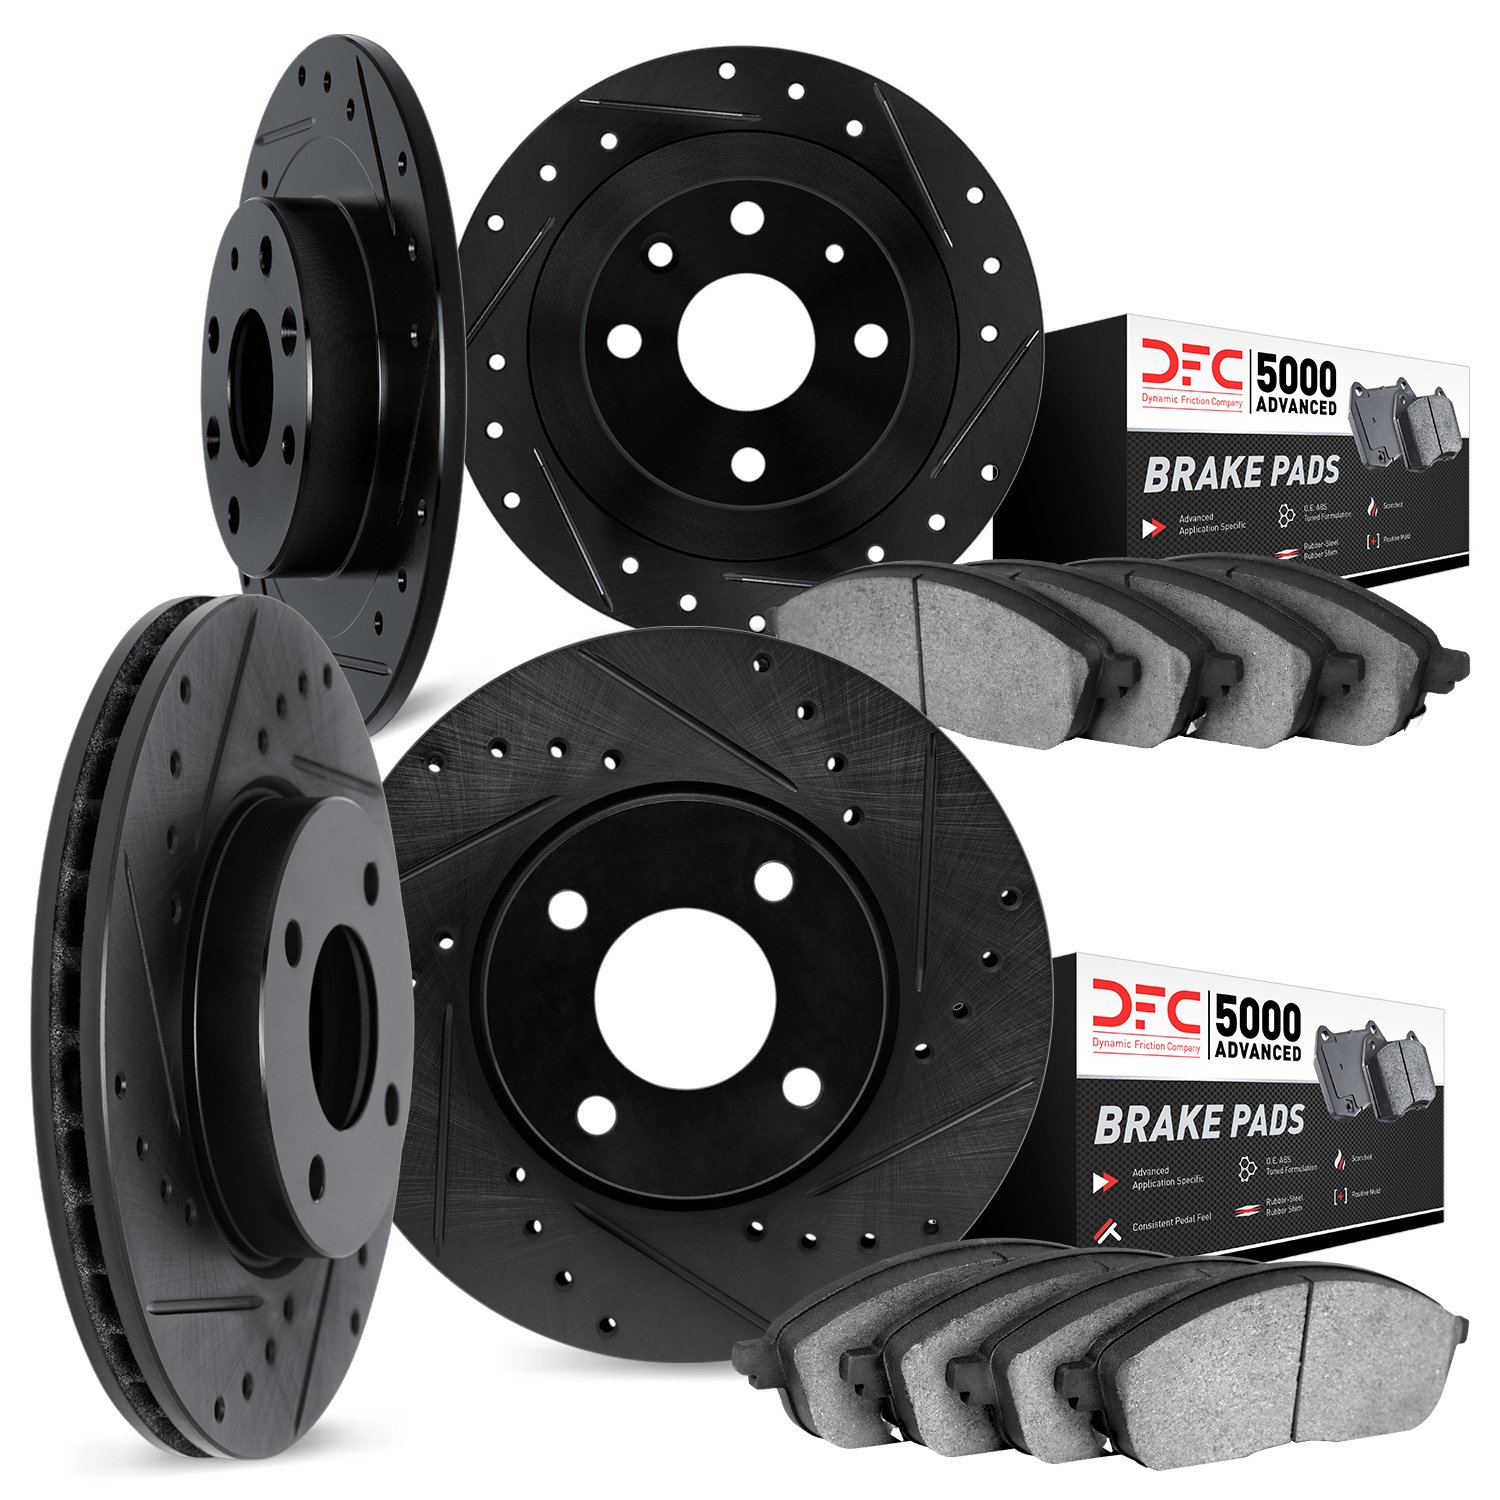 8504-28004 Drilled/Slotted Brake Rotors w/5000 Advanced Brake Pads Kit [Black], 1977-1989 Peugeot, Position: Front and Rear